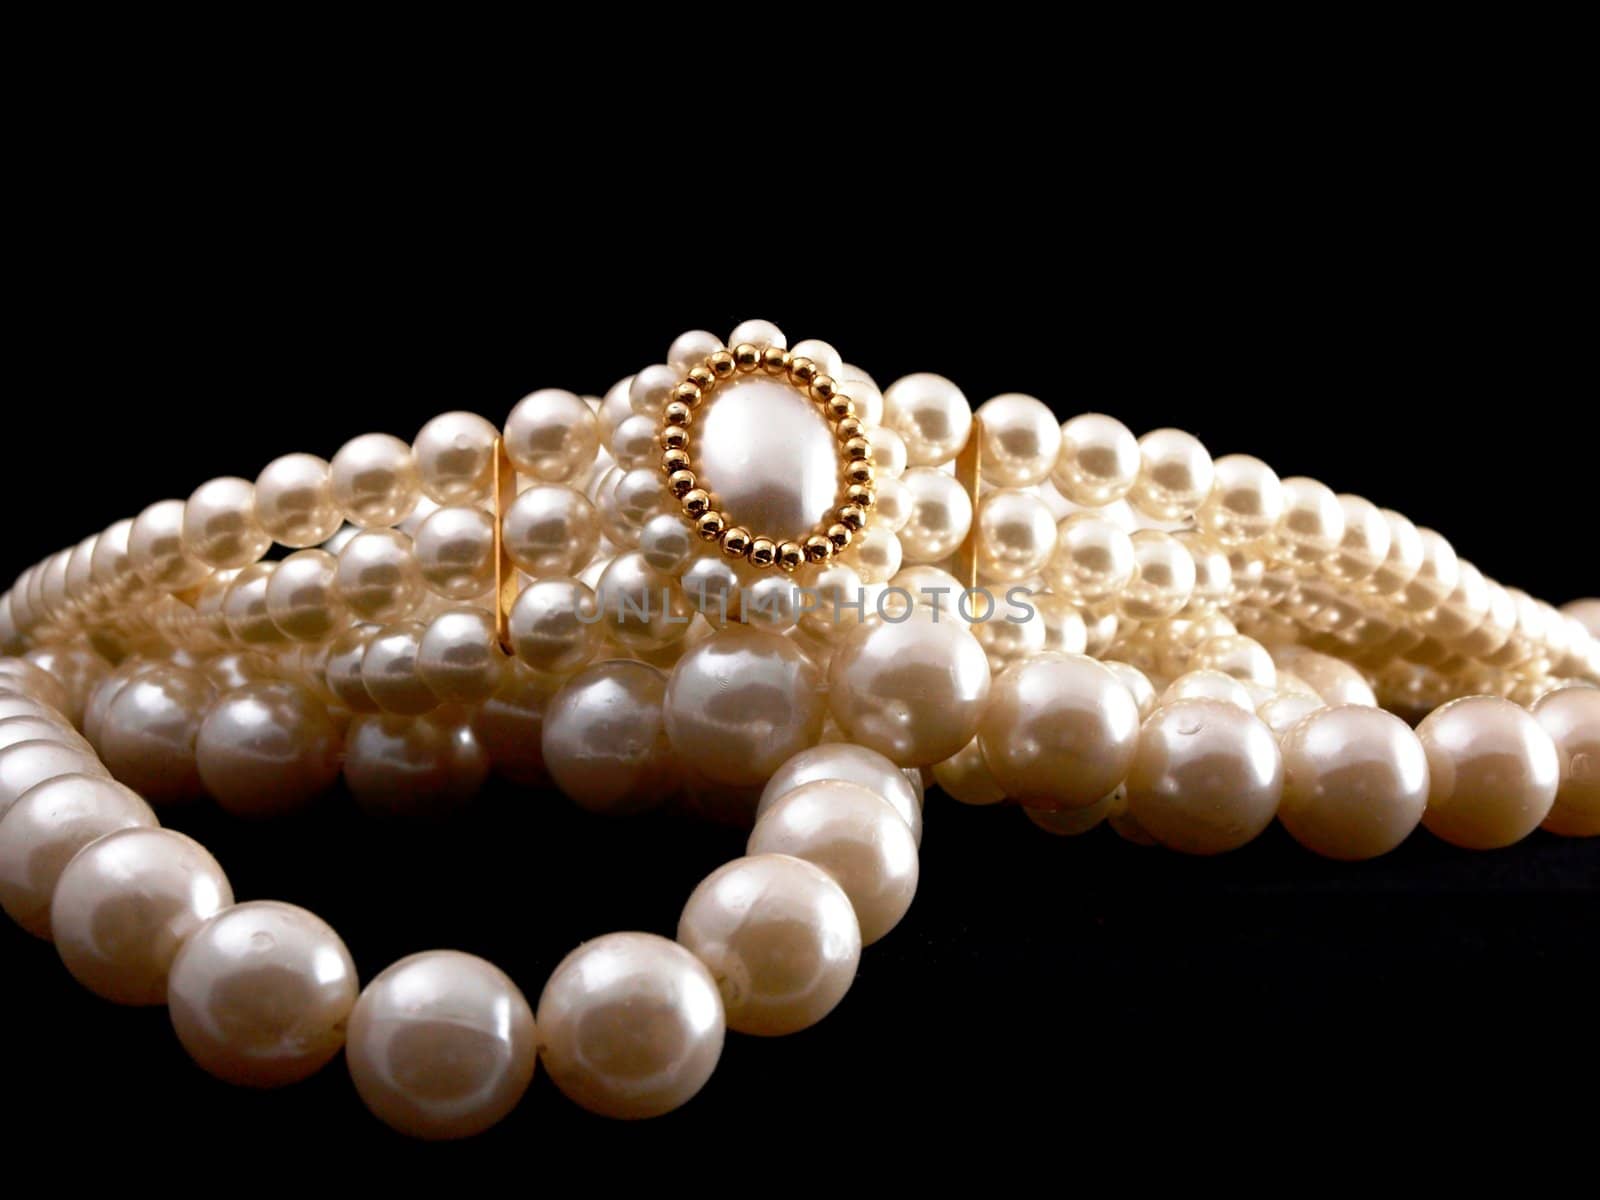 Pearls with brooch, high depth of field, towards black background